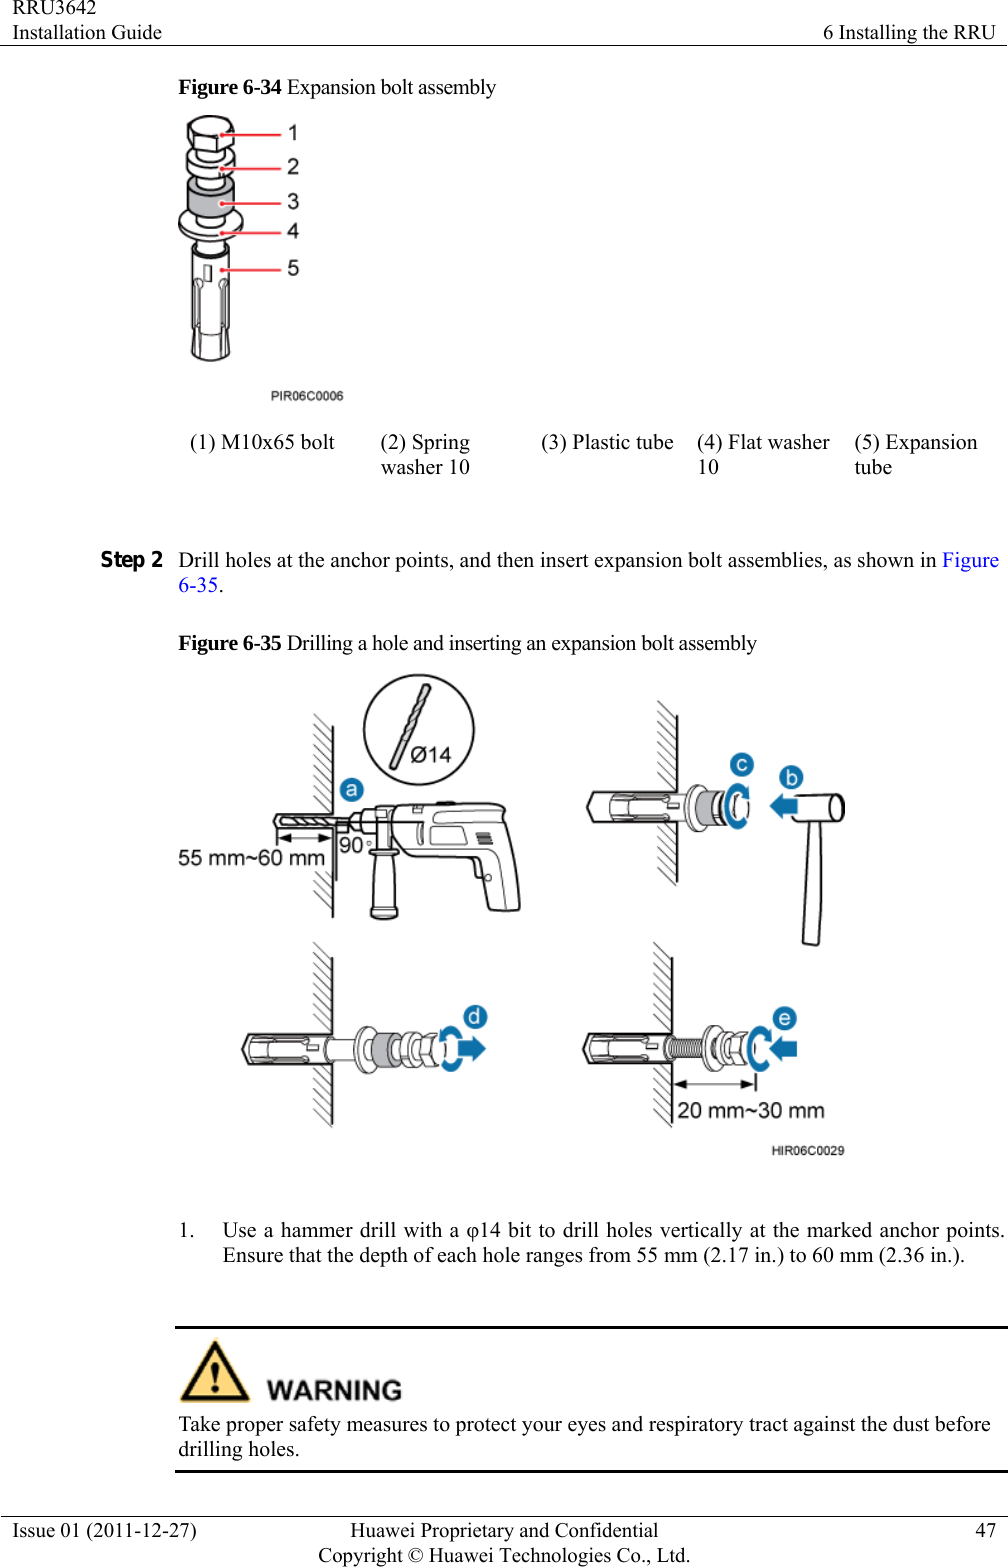 RRU3642 Installation Guide  6 Installing the RRU Issue 01 (2011-12-27)  Huawei Proprietary and Confidential         Copyright © Huawei Technologies Co., Ltd.47 Figure 6-34 Expansion bolt assembly  (1) M10x65 bolt  (2) Spring washer 10 (3) Plastic tube (4) Flat washer 10 (5) Expansion tube  Step 2 Drill holes at the anchor points, and then insert expansion bolt assemblies, as shown in Figure 6-35. Figure 6-35 Drilling a hole and inserting an expansion bolt assembly   1. Use a hammer drill with a φ14 bit to drill holes vertically at the marked anchor points. Ensure that the depth of each hole ranges from 55 mm (2.17 in.) to 60 mm (2.36 in.).     Take proper safety measures to protect your eyes and respiratory tract against the dust before drilling holes. 